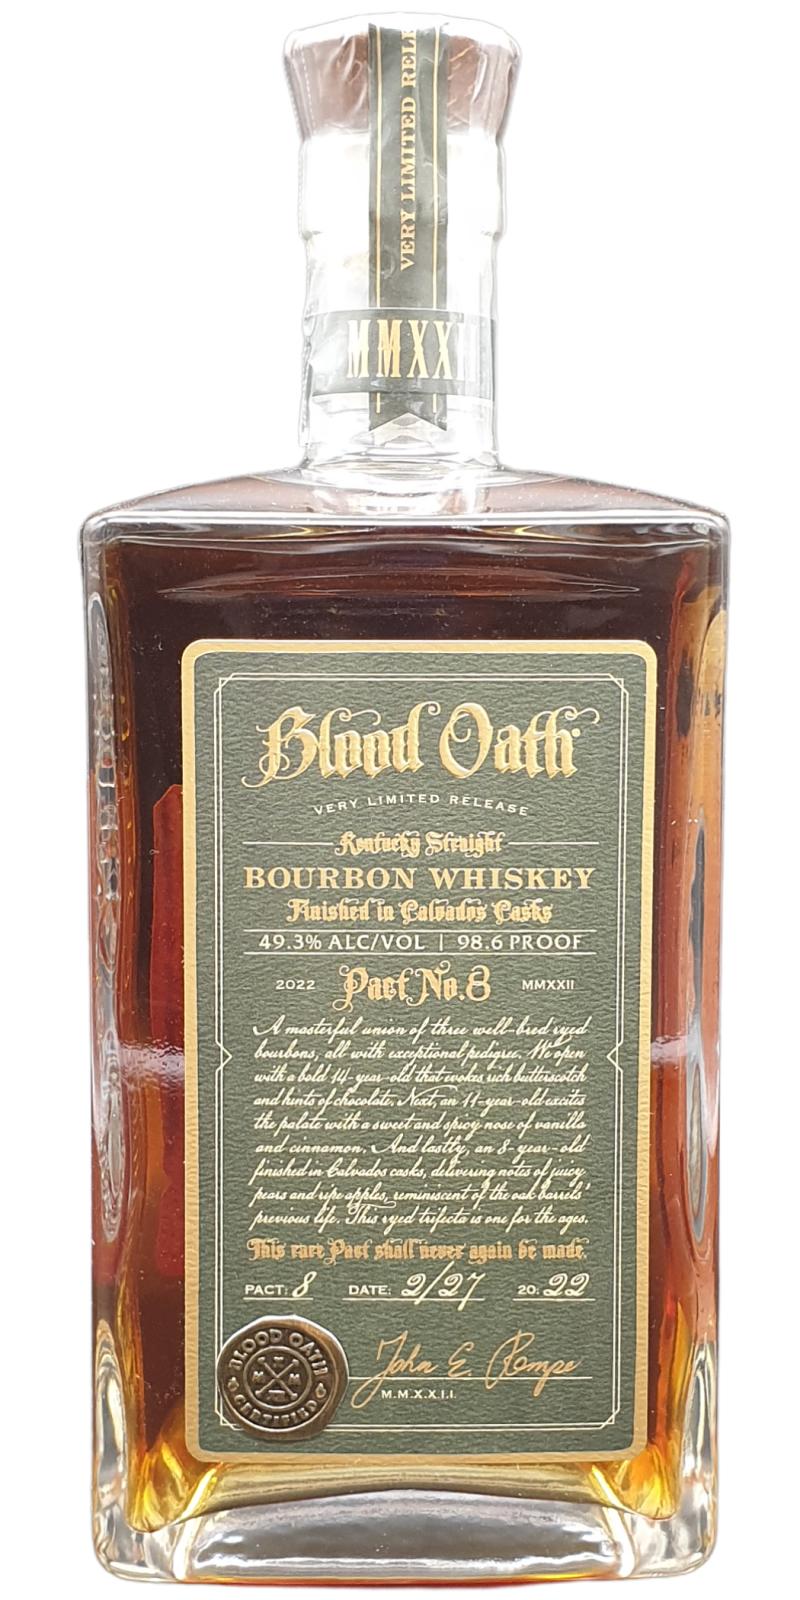 Blood Oath Pact No. 8 Sour Mash Kentucky Straight Bourbon Whisky Calvados 49.3% 700ml